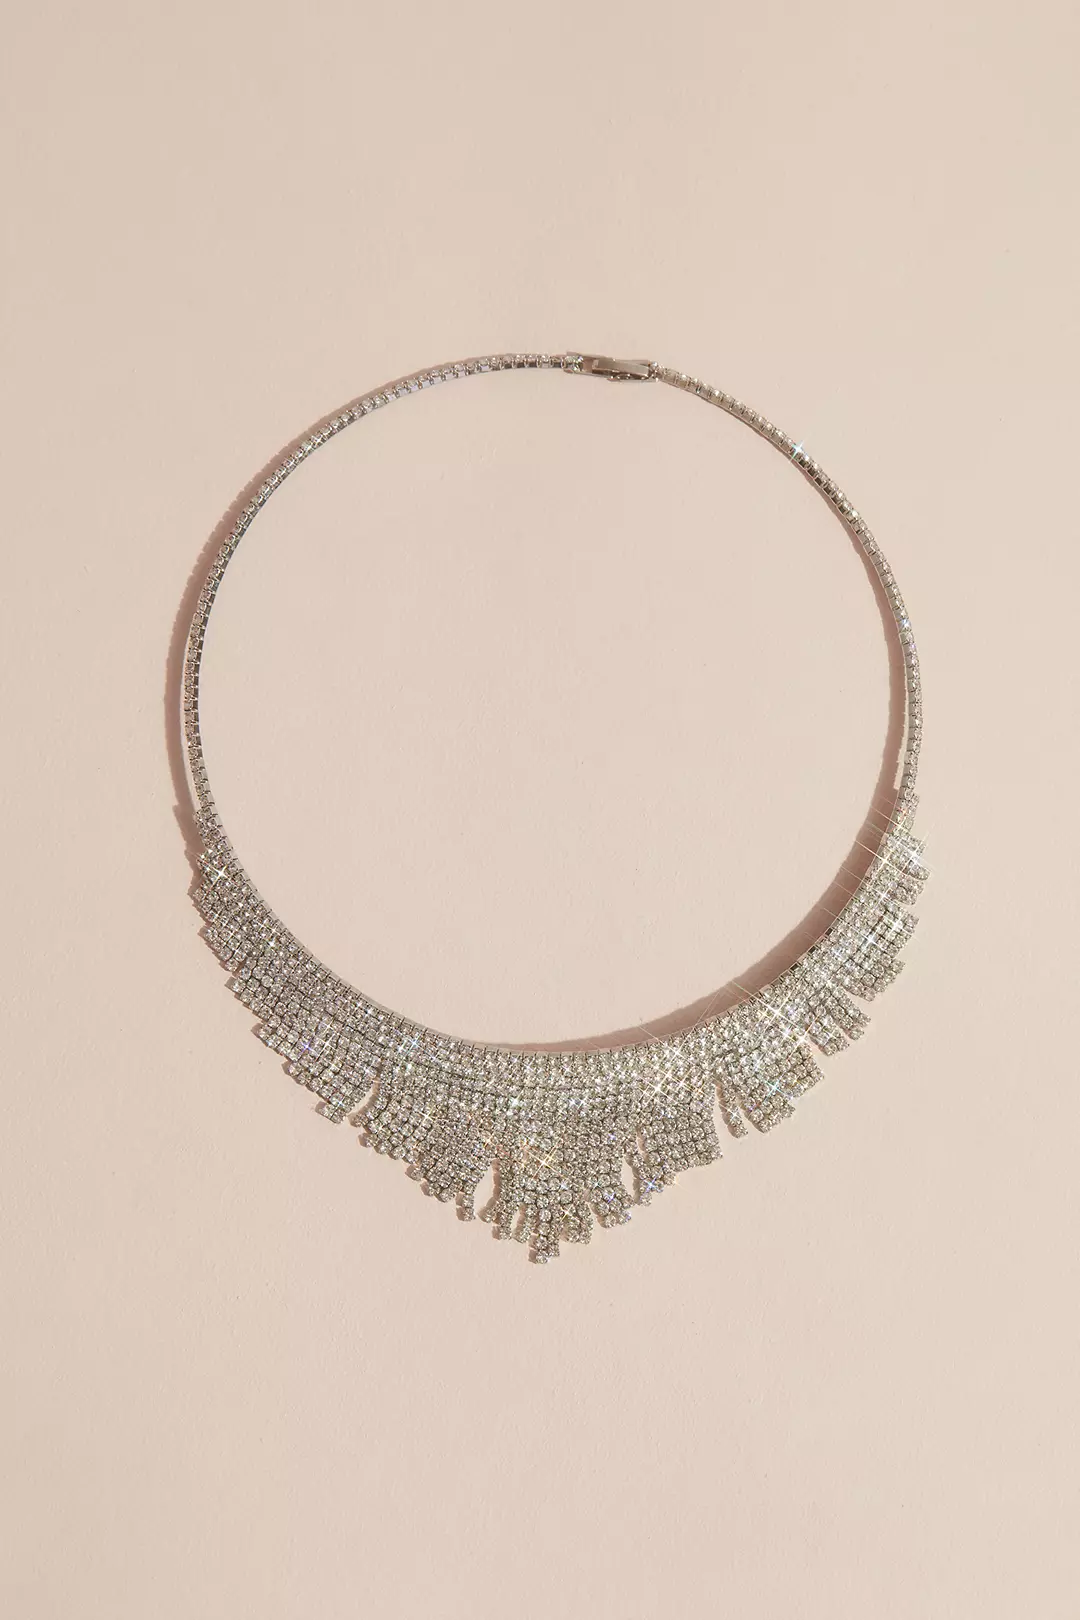 Pointed Crystal Fringe Collar Necklace Image